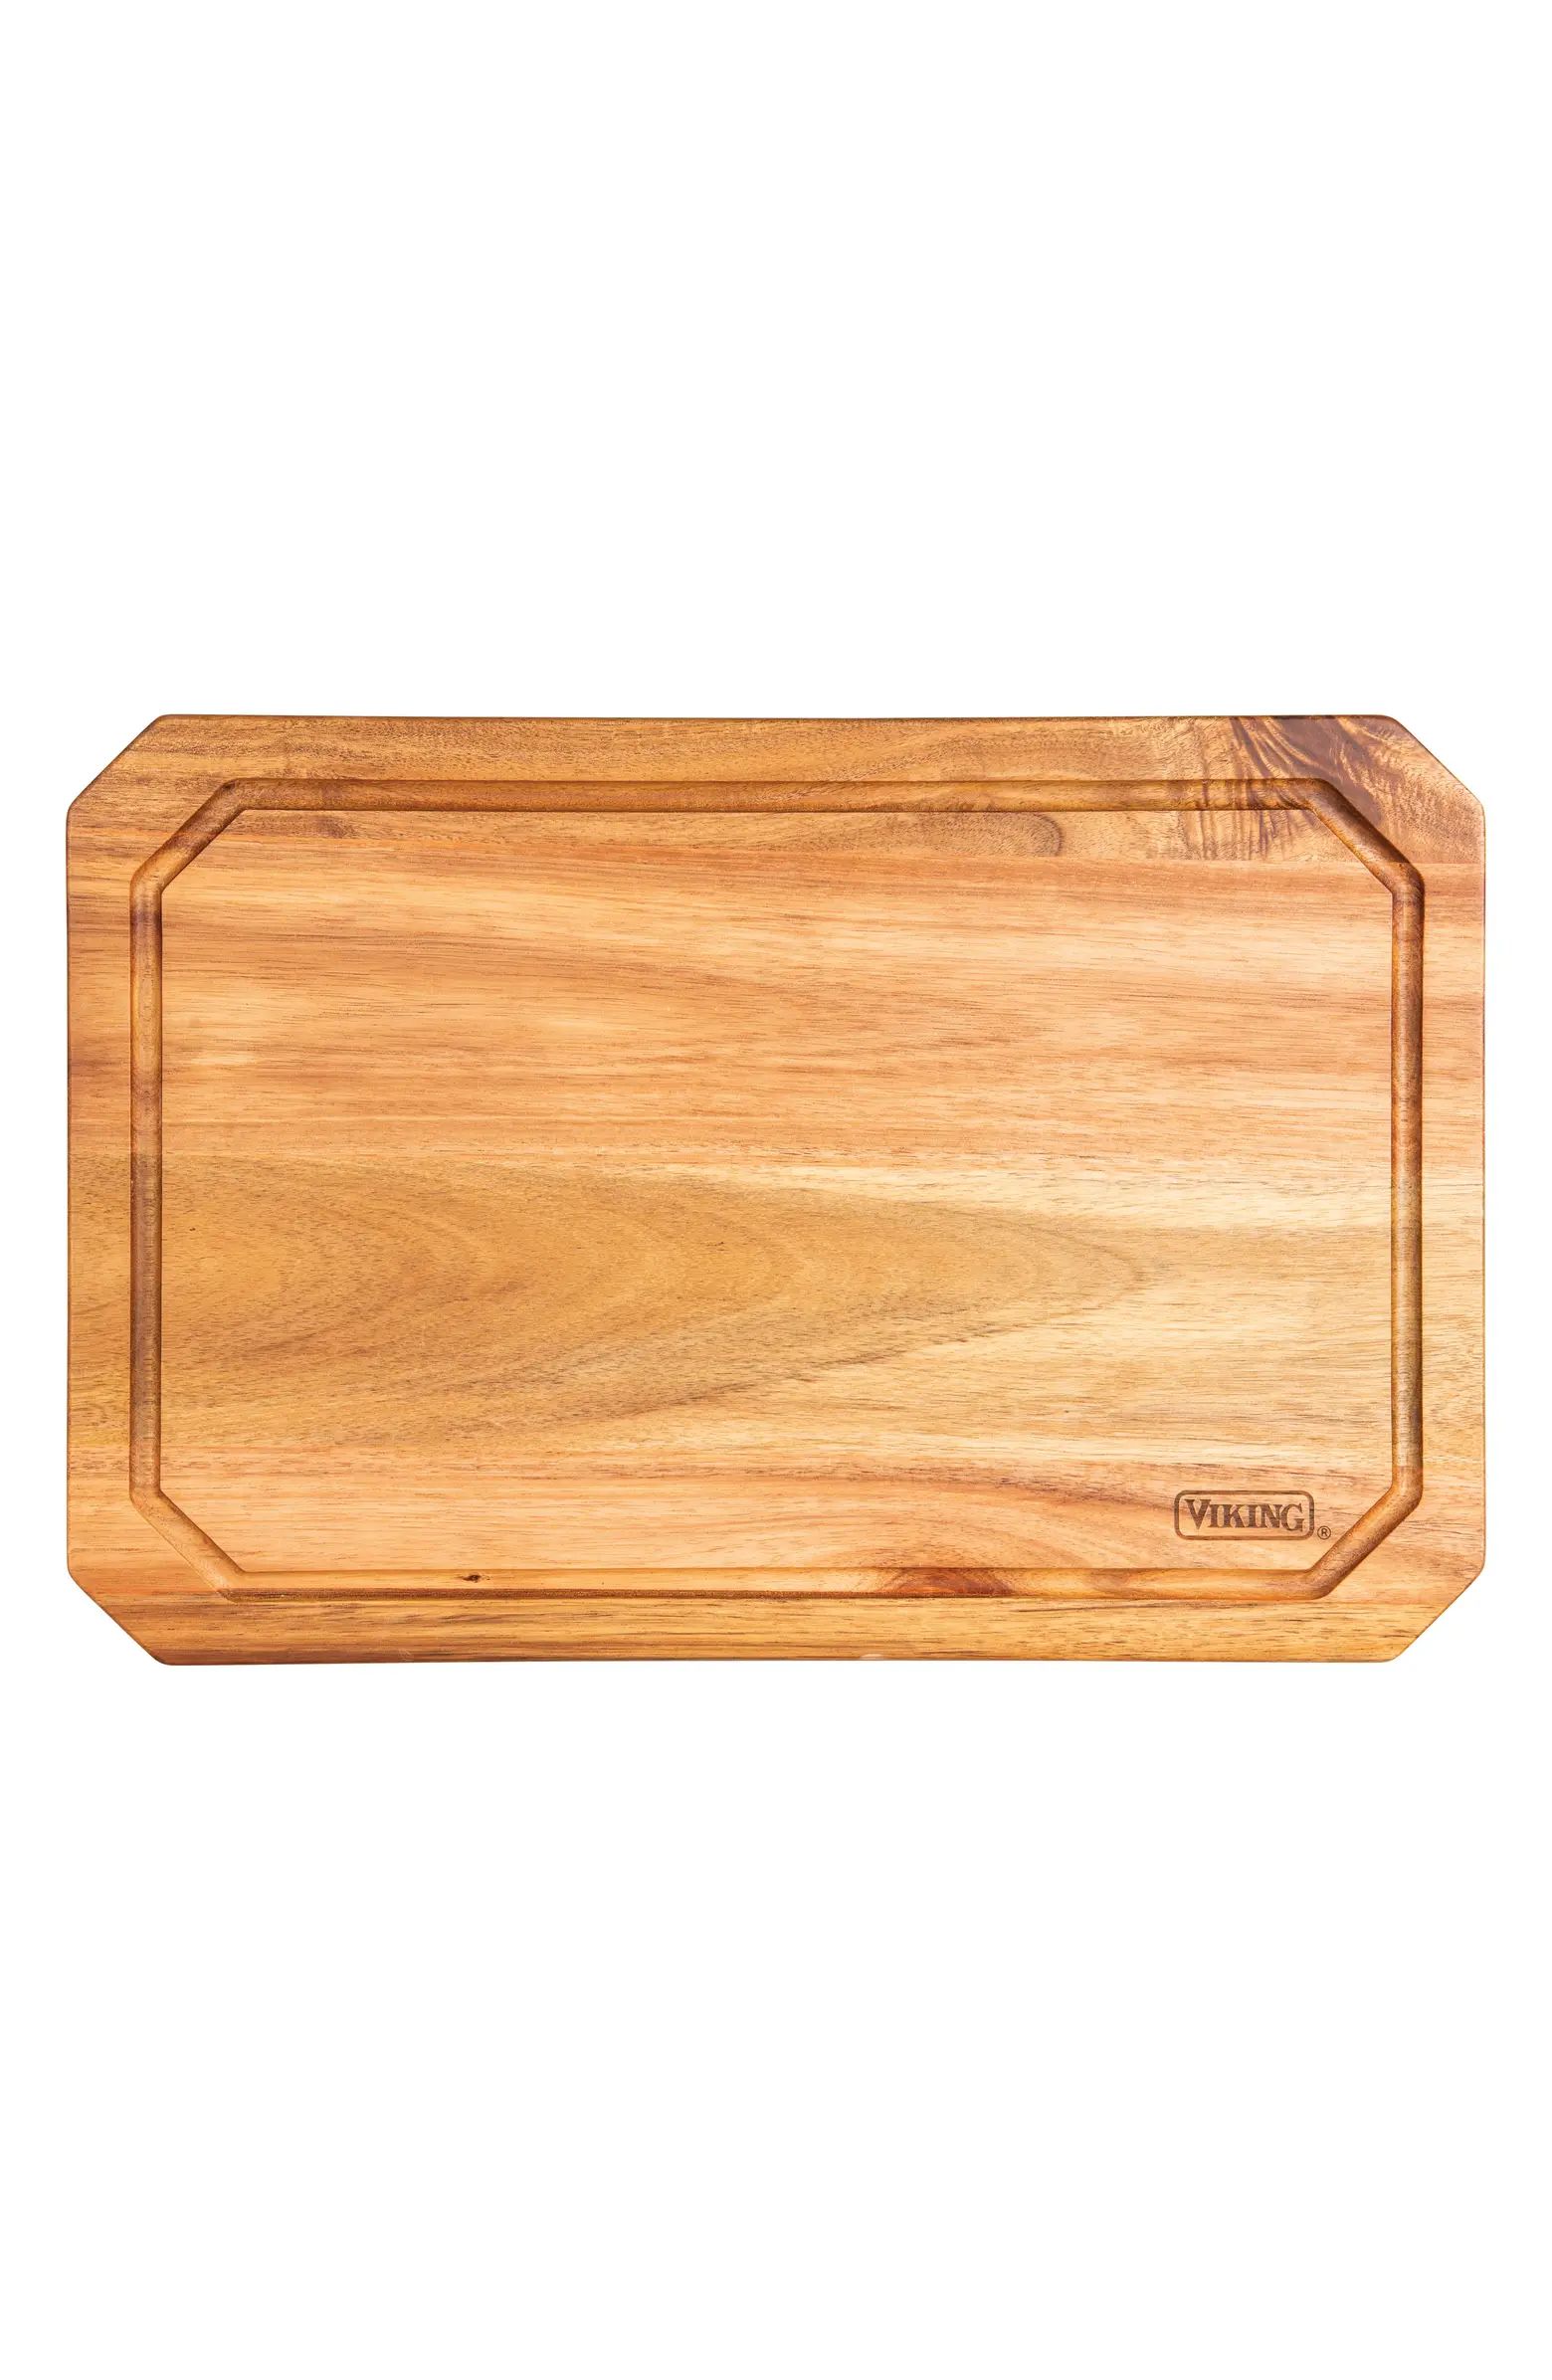 Viking Acacia Wood Carving Board with Juice Groove | Nordstrom | Nordstrom